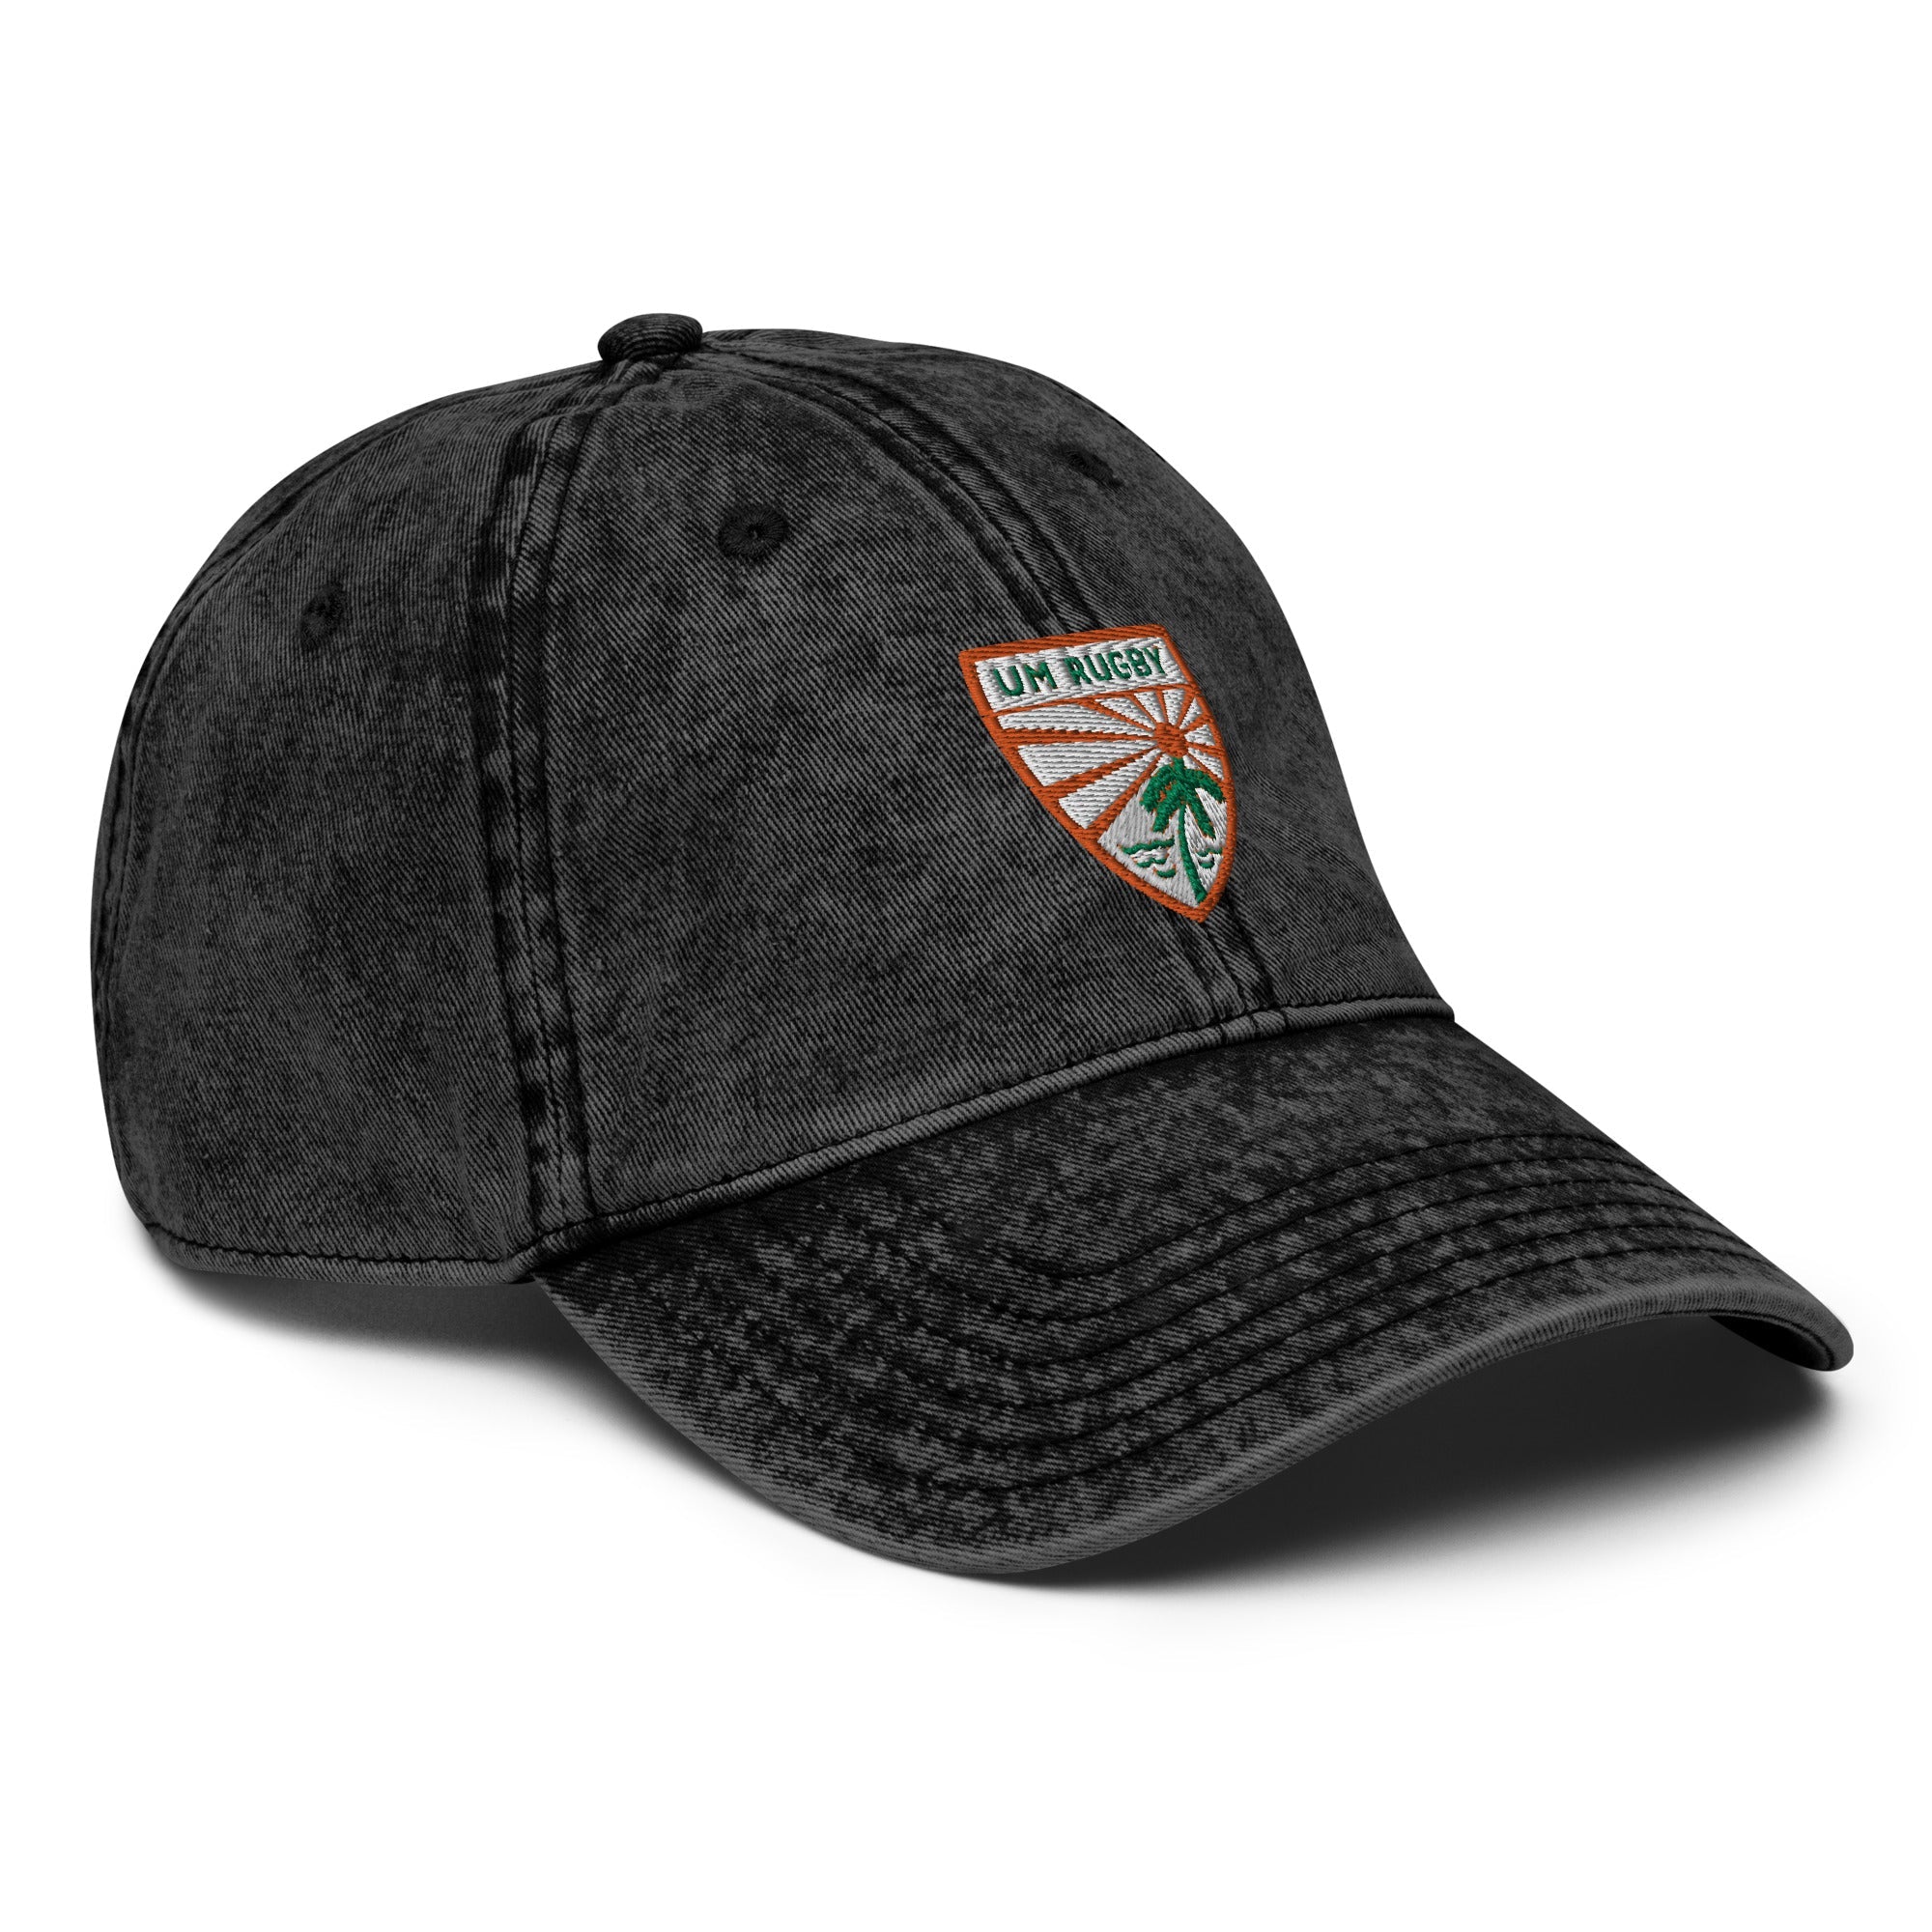 Rugby Imports UMiami Rugby Vintage Twill Cap